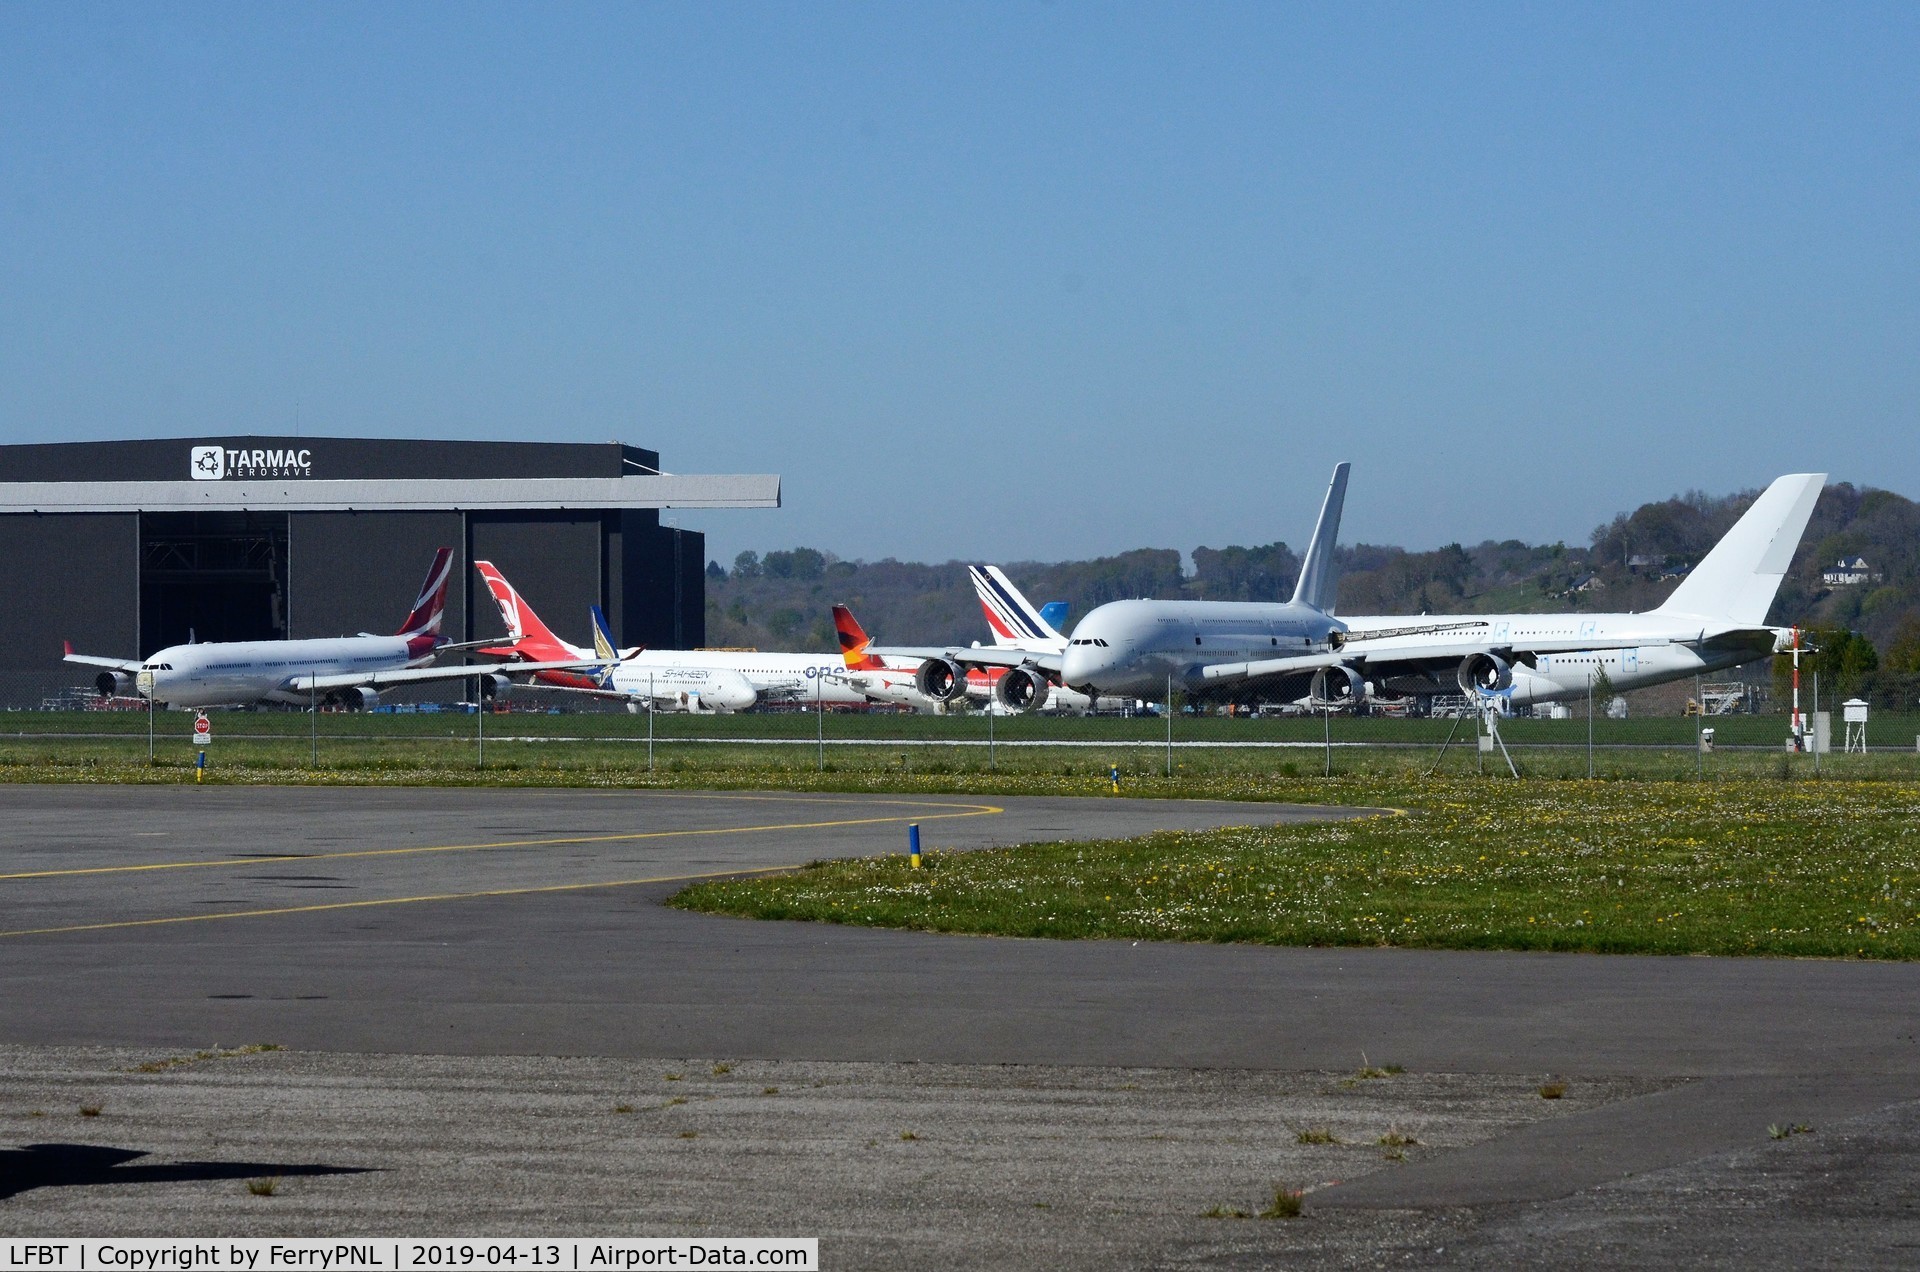 Tarbes Airport, Lourdes Pyrenees Airport France (LFBT) - Scrapyard at Tarbes. Last stop for these planes including two A380